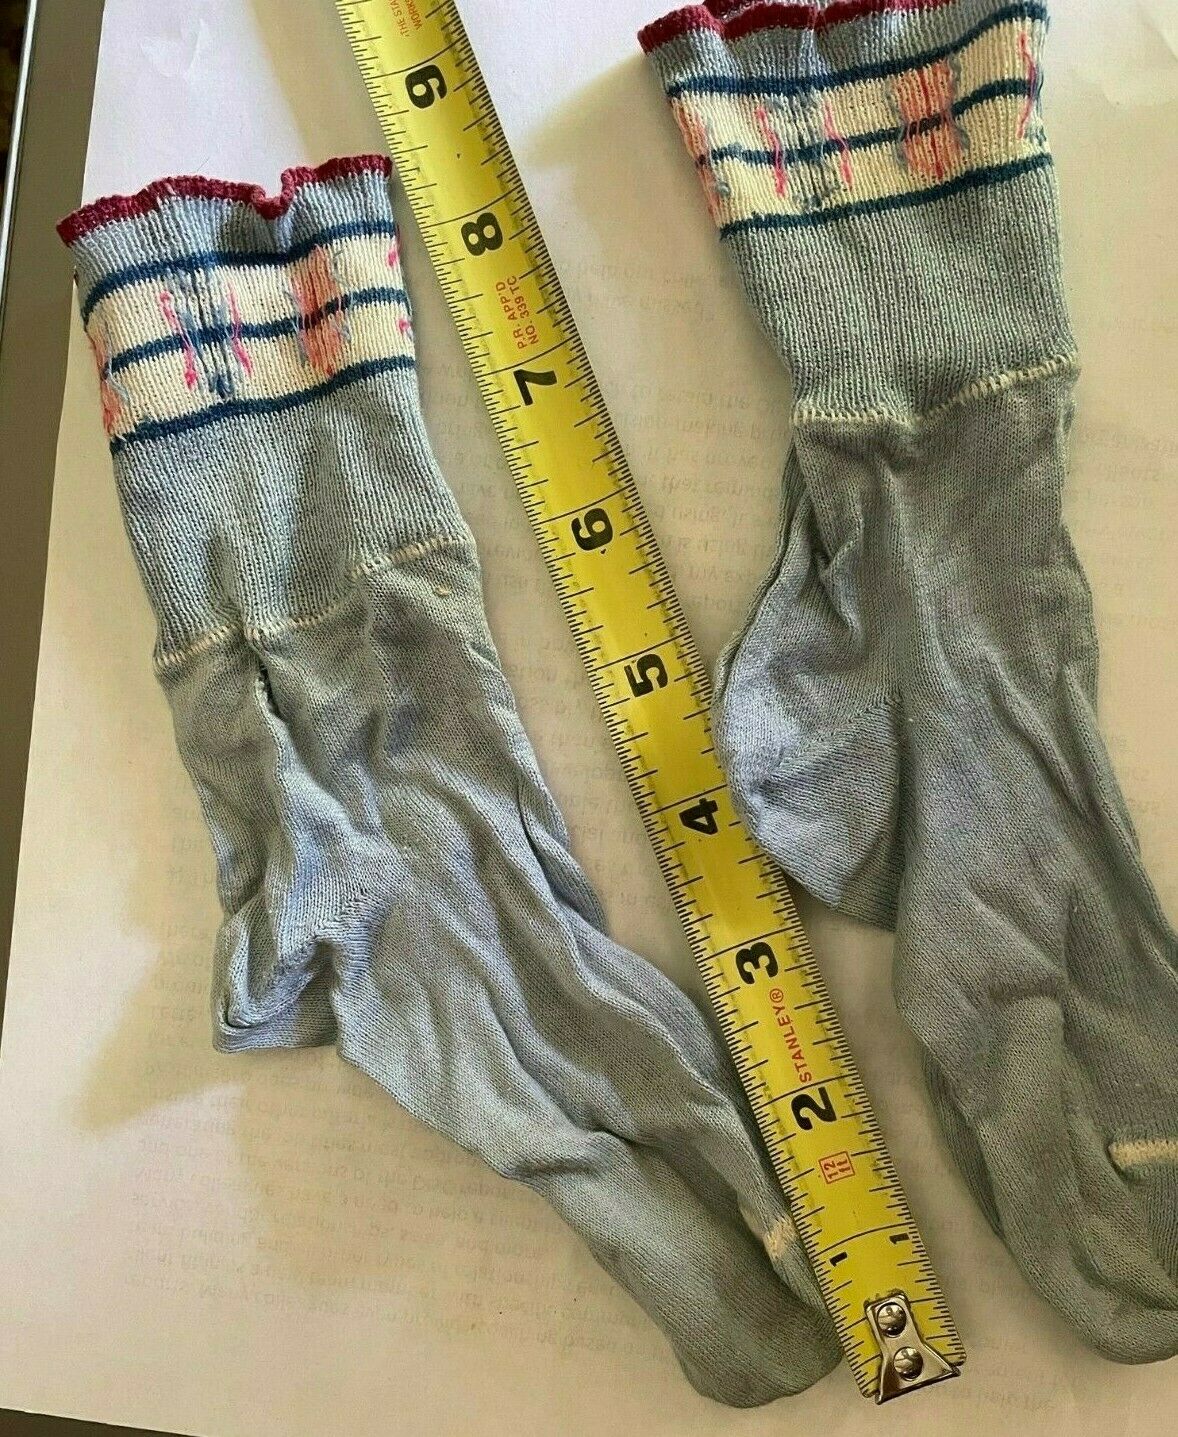 Vintage 1940's Child's Socks Blue With Decorative Fold Down Top - Boys Unusual